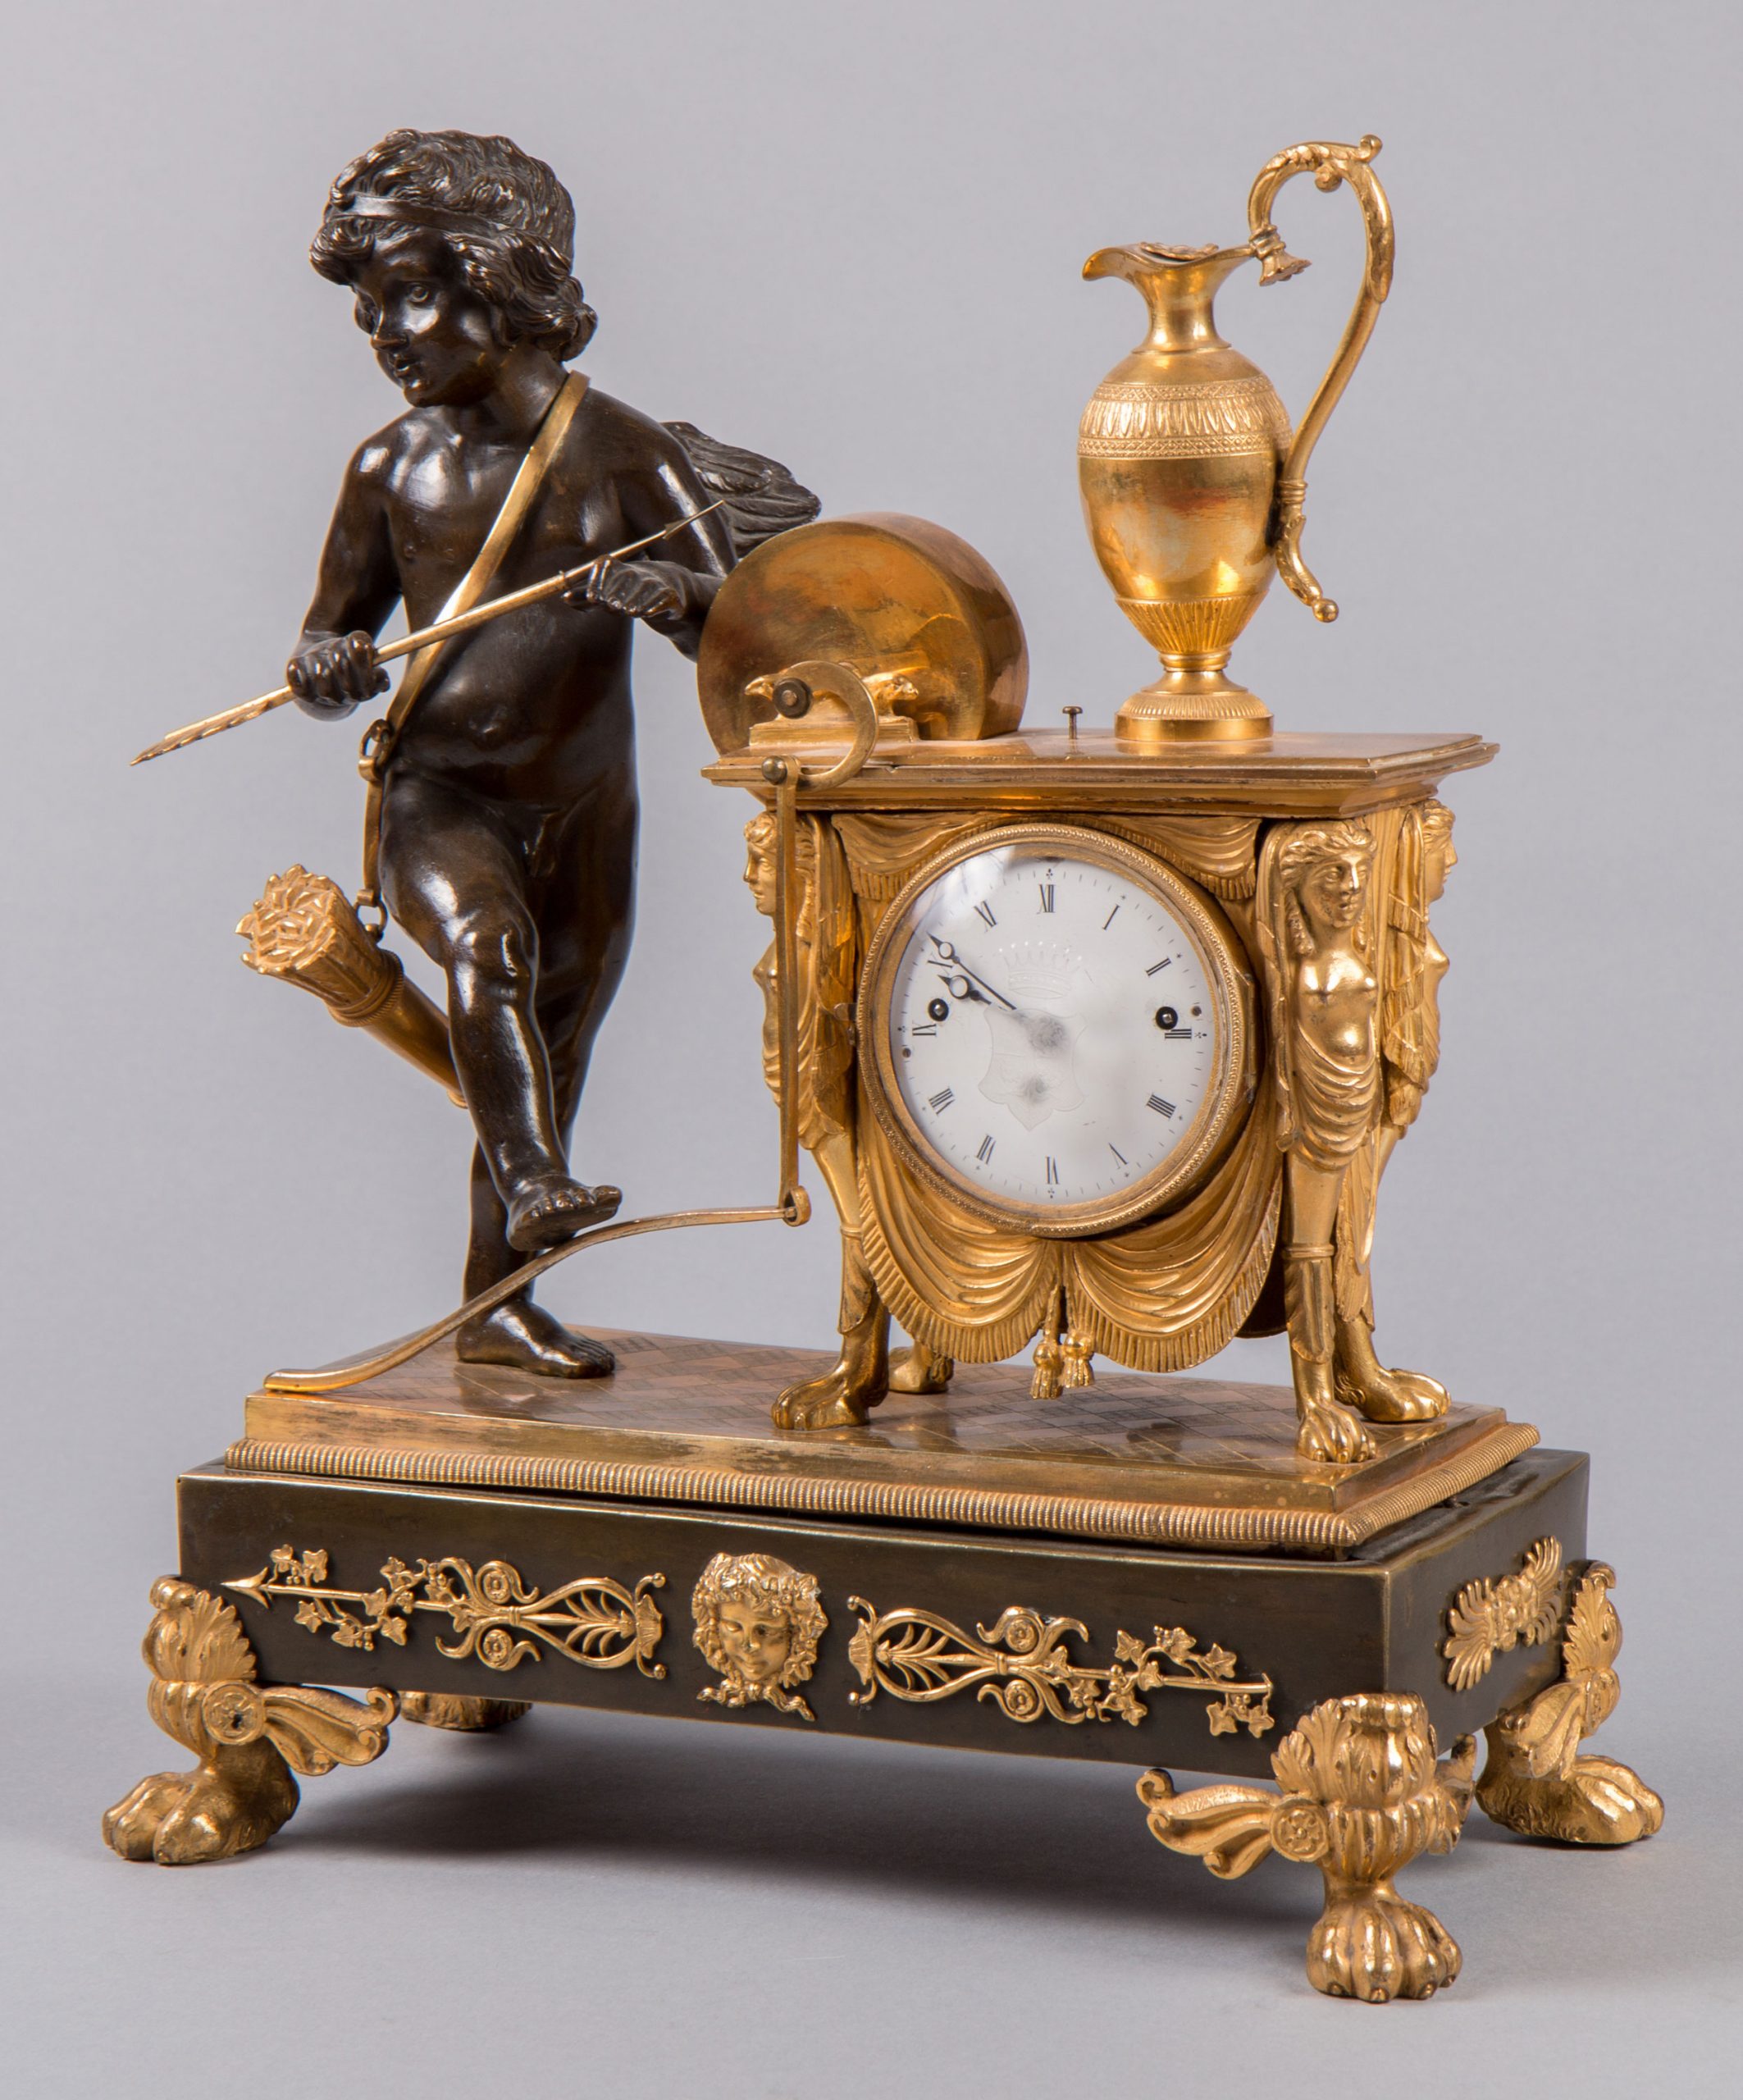 Figural empire mantel clock Andréewitch Stephan - “Amor”